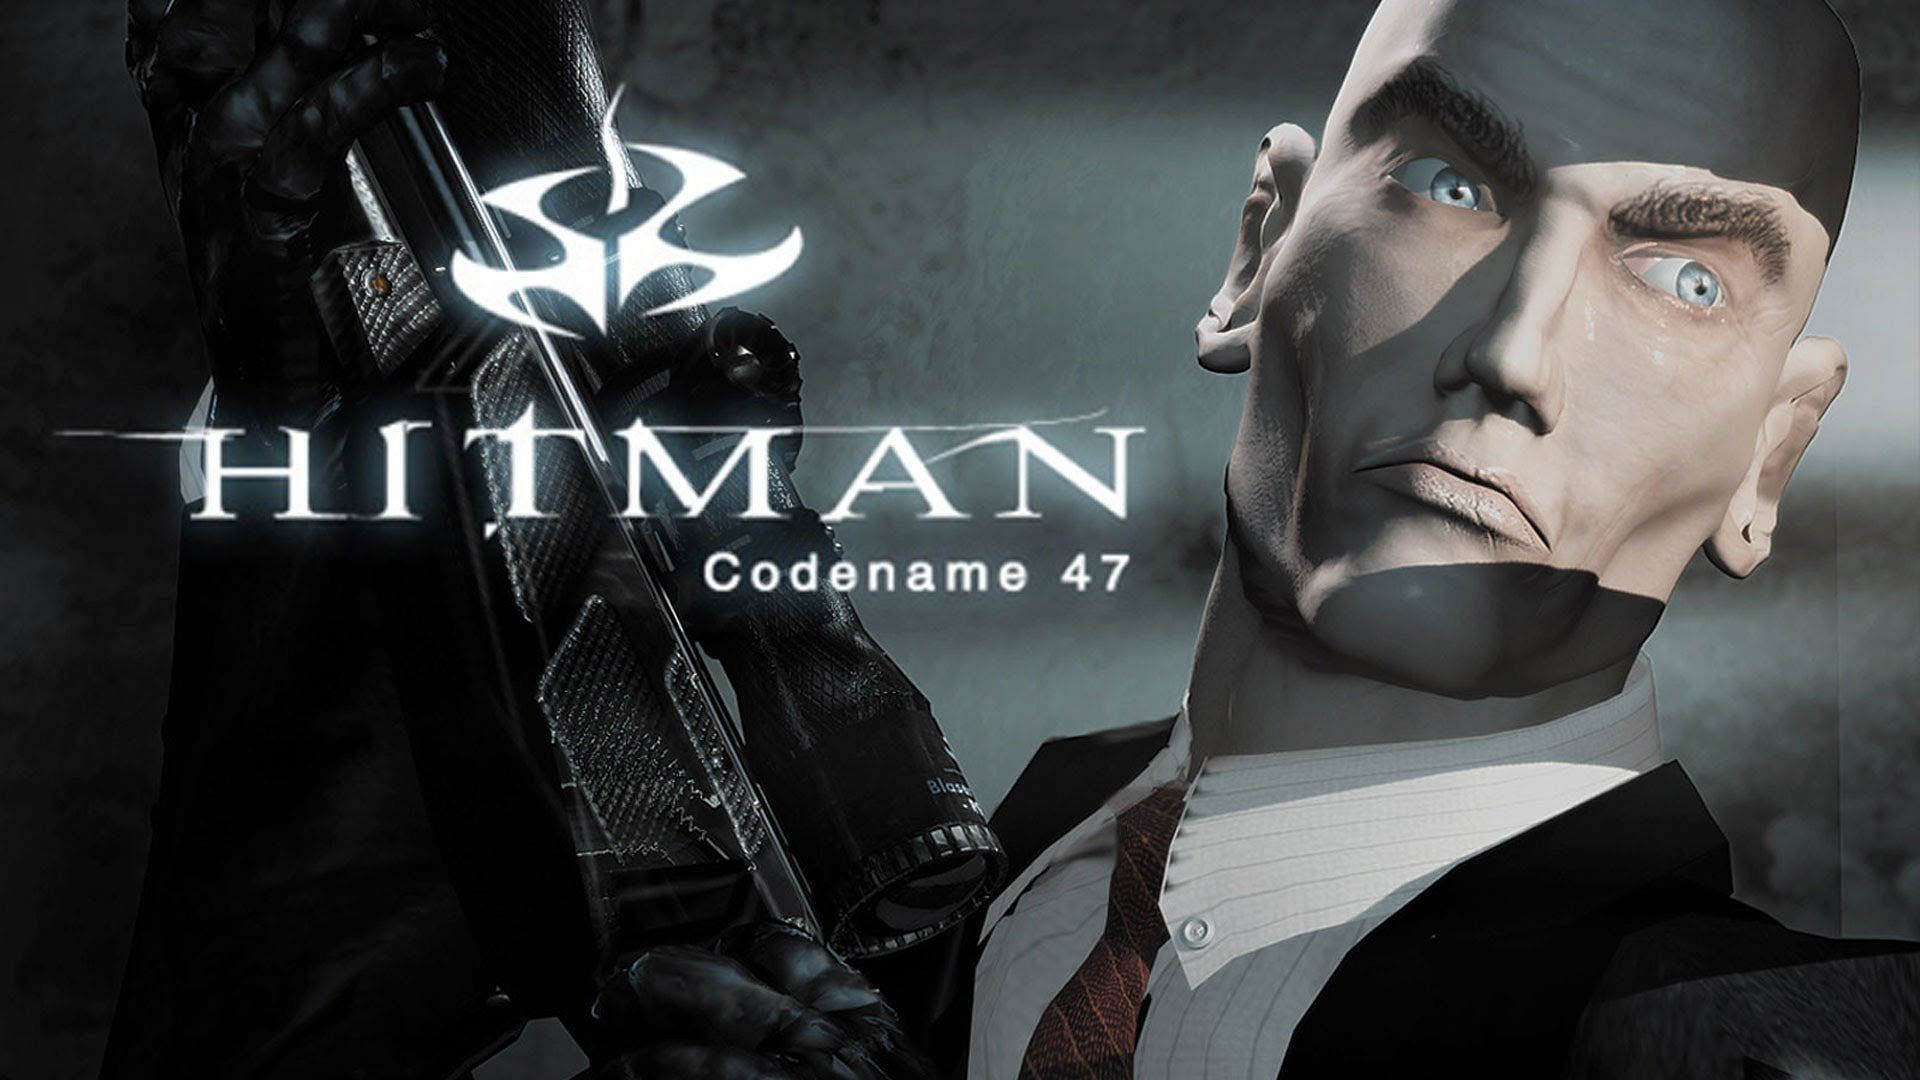 Codename 47 started off this iconic series (Image via IO Interactive)